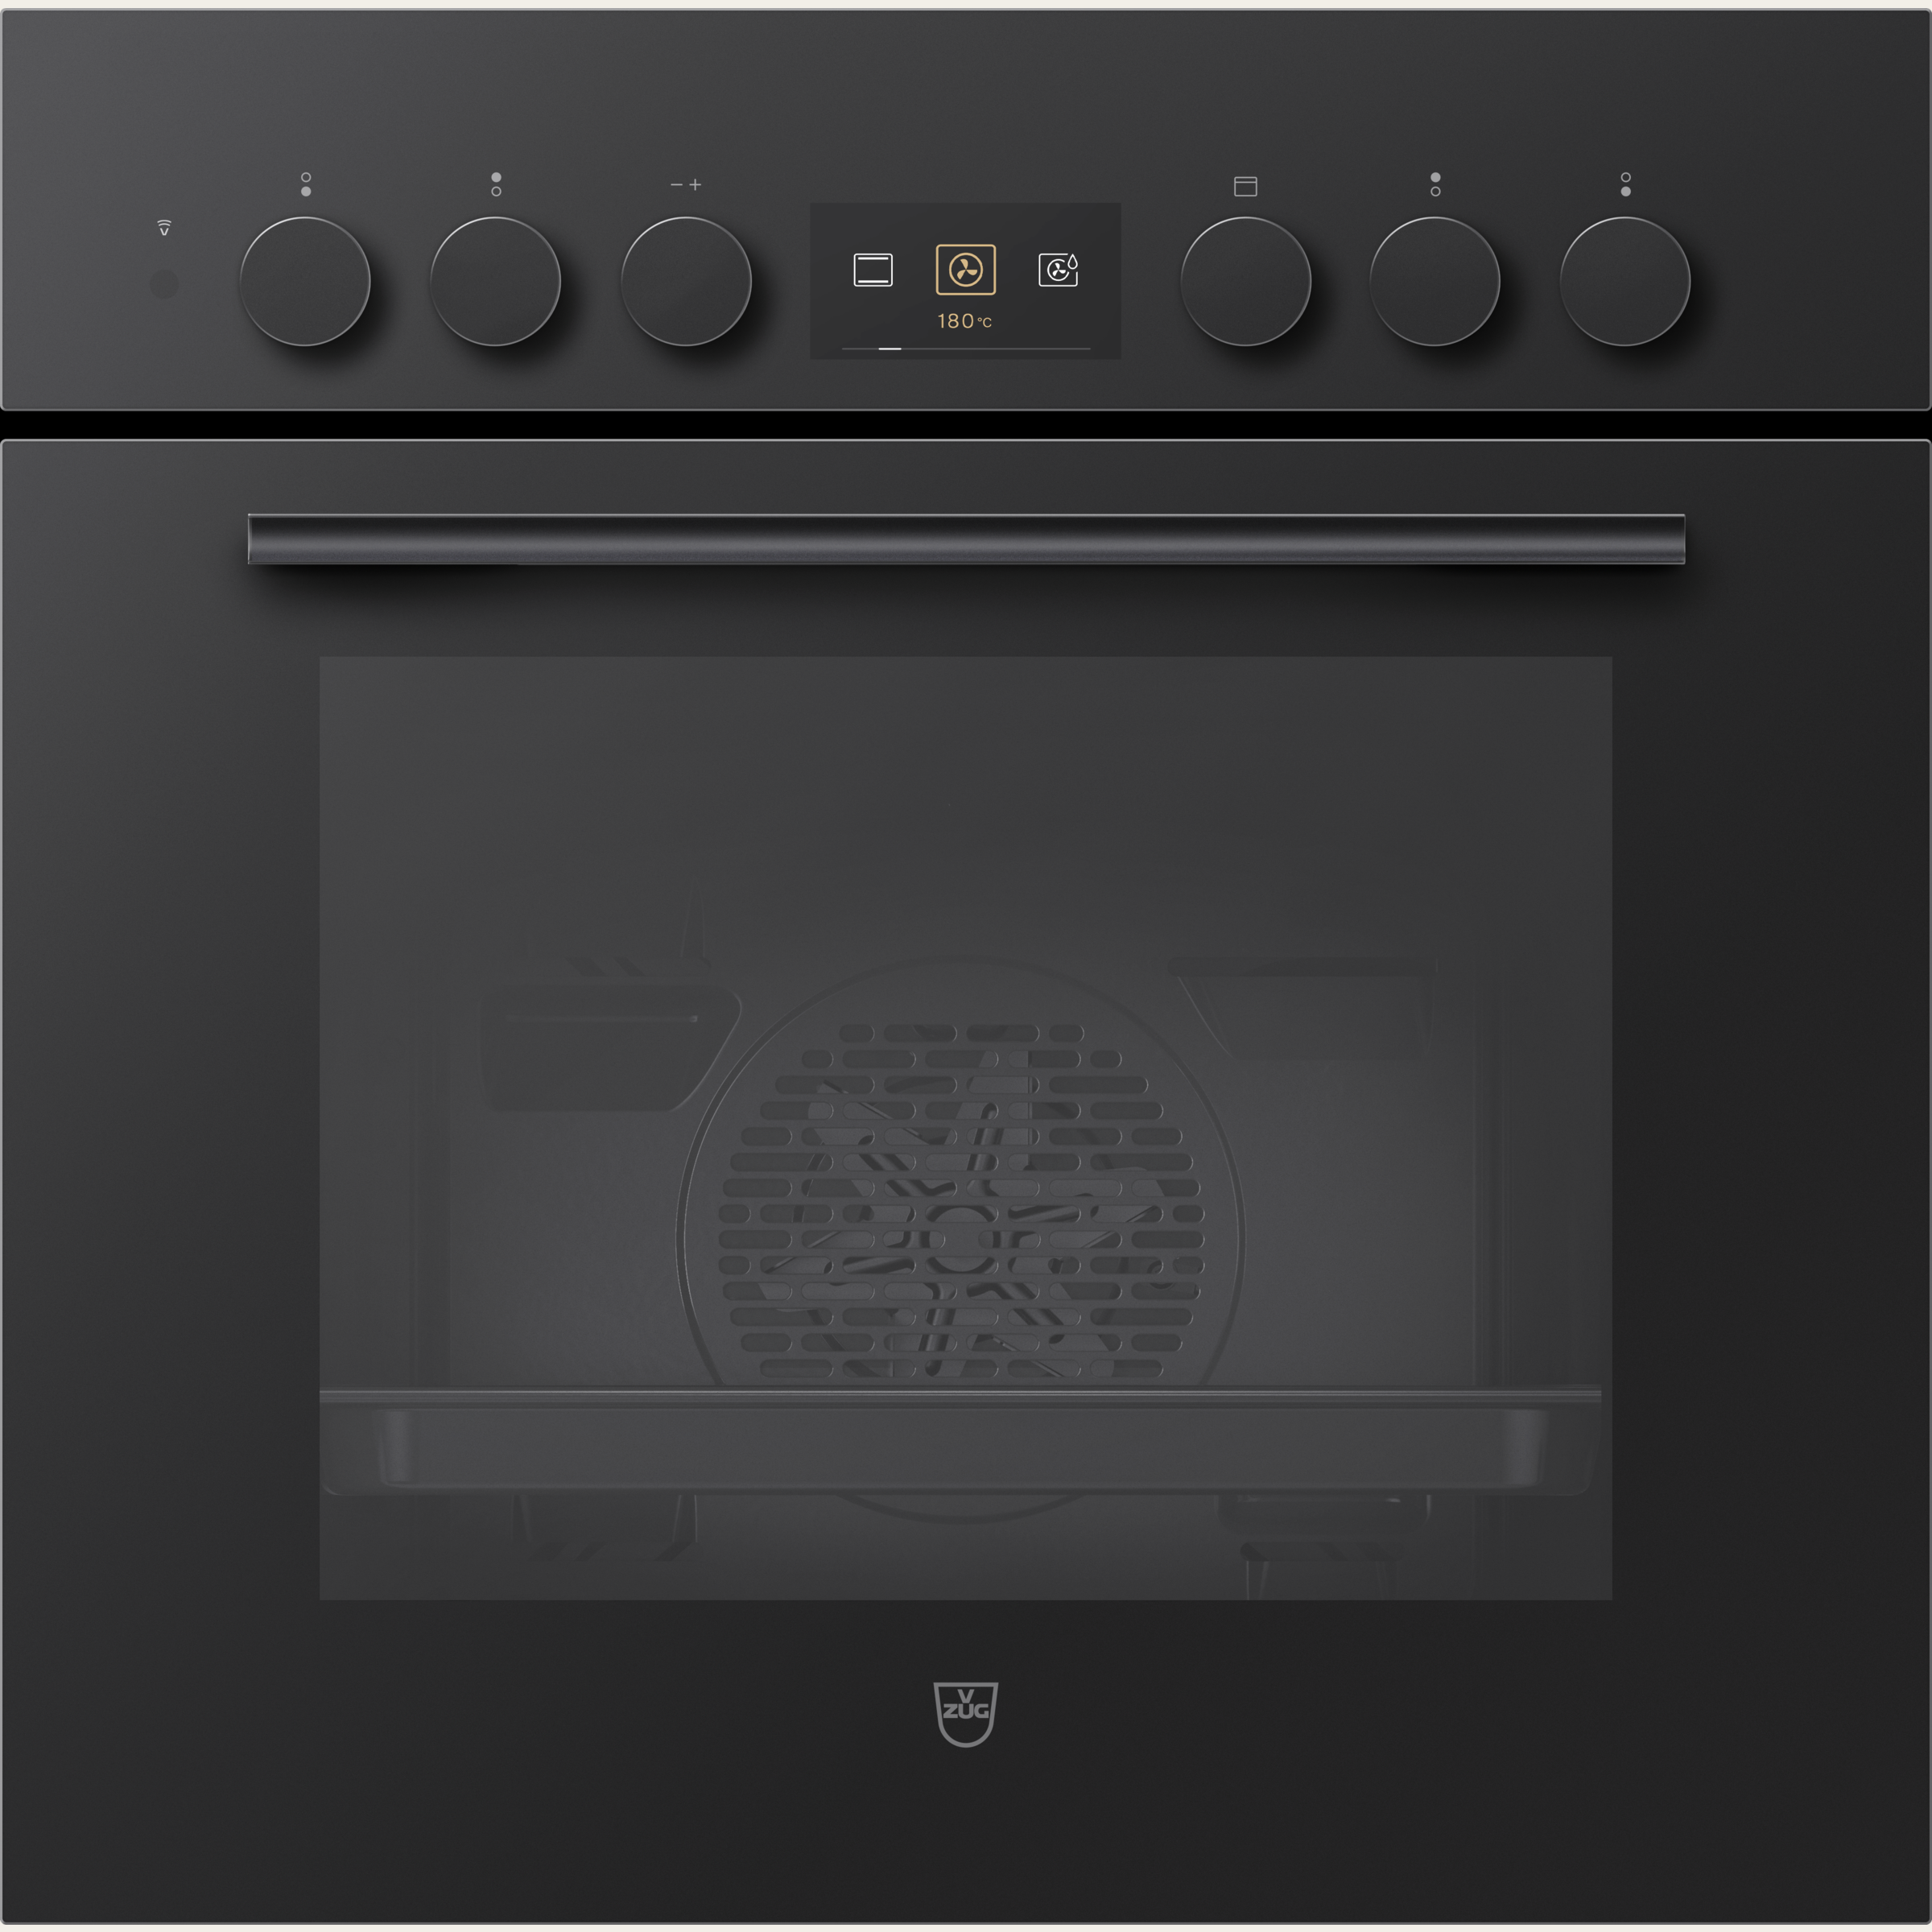 V-ZUG Cooker Combair V600 6UH, Standard width: 60 cm, Standard height: 60 cm, Nero with glass, Handle: Nero, dial, V-ZUG-Home, TopClean, Number of controllable cooking zones: 4, 400V